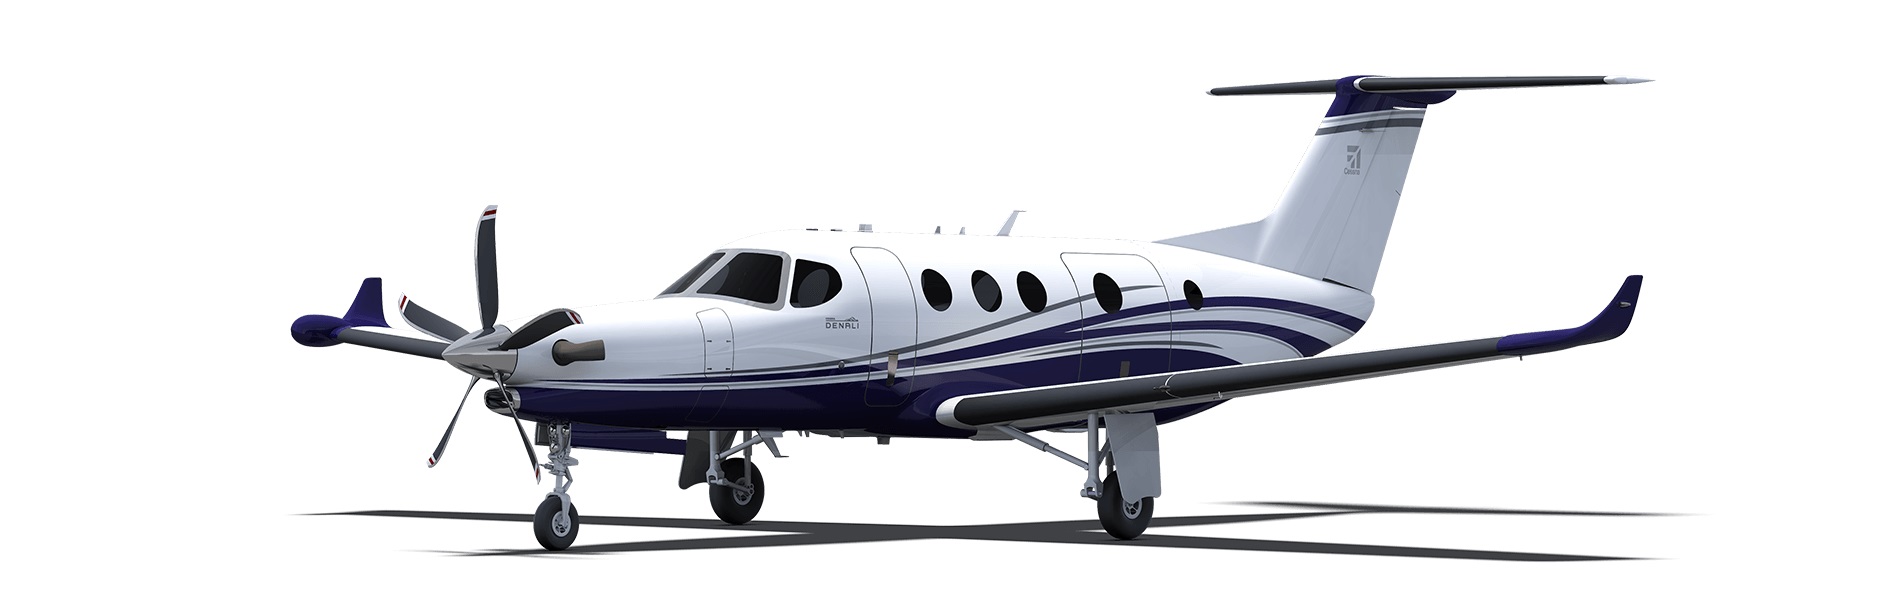 Cessna Denali poised to redefine segment as first test articles come to life | The JetAv Blog